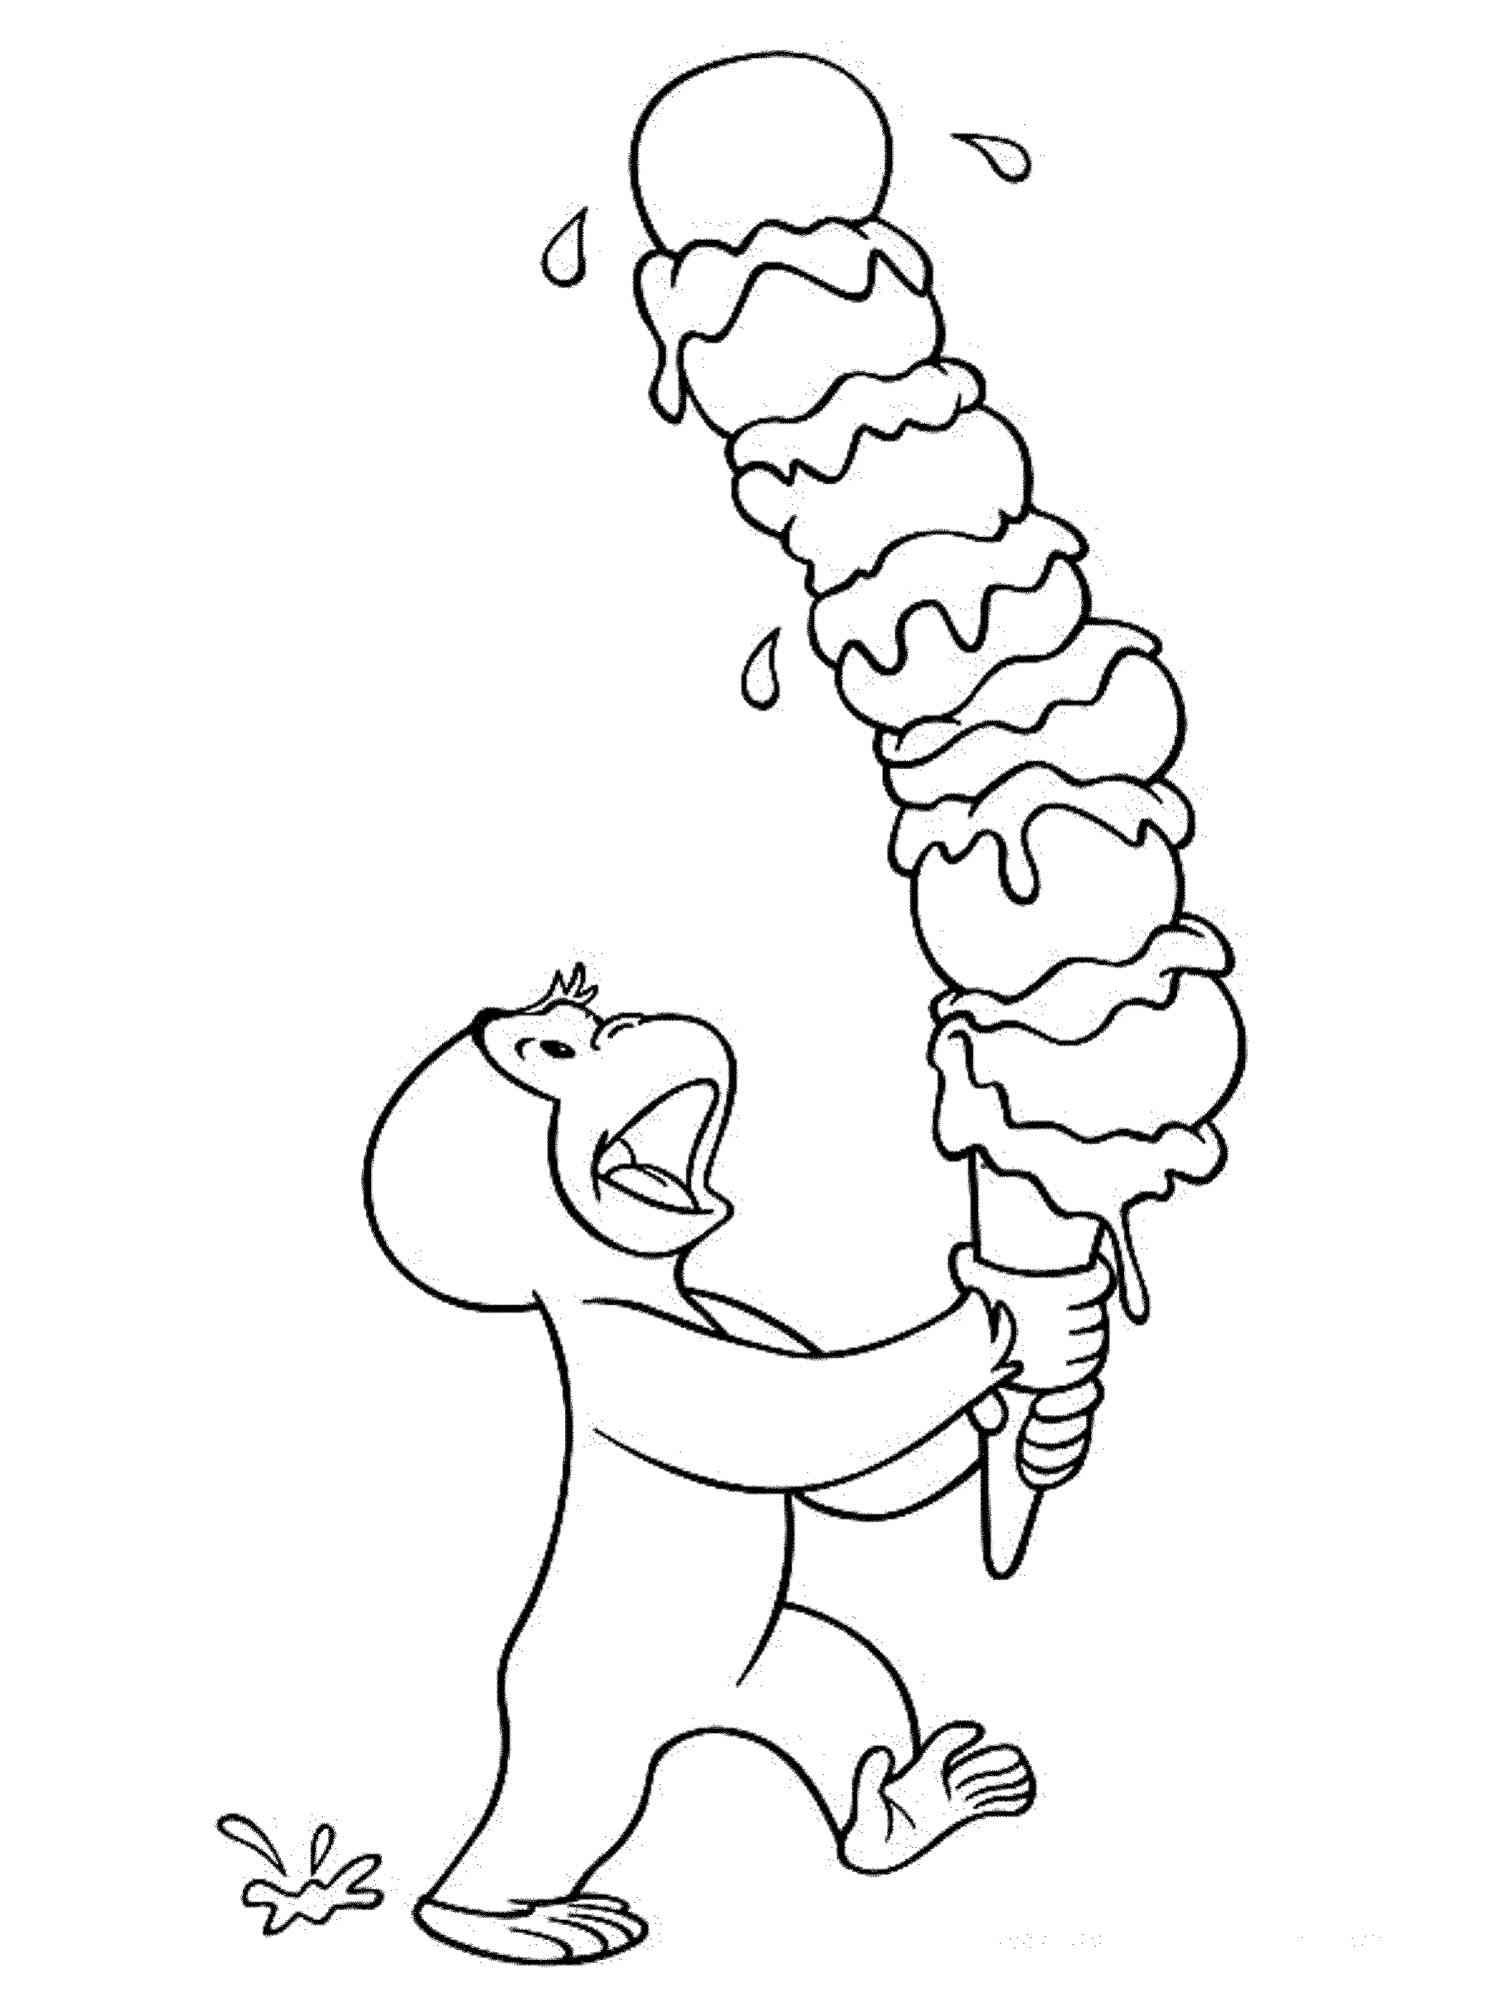 Curious George 22 coloring page